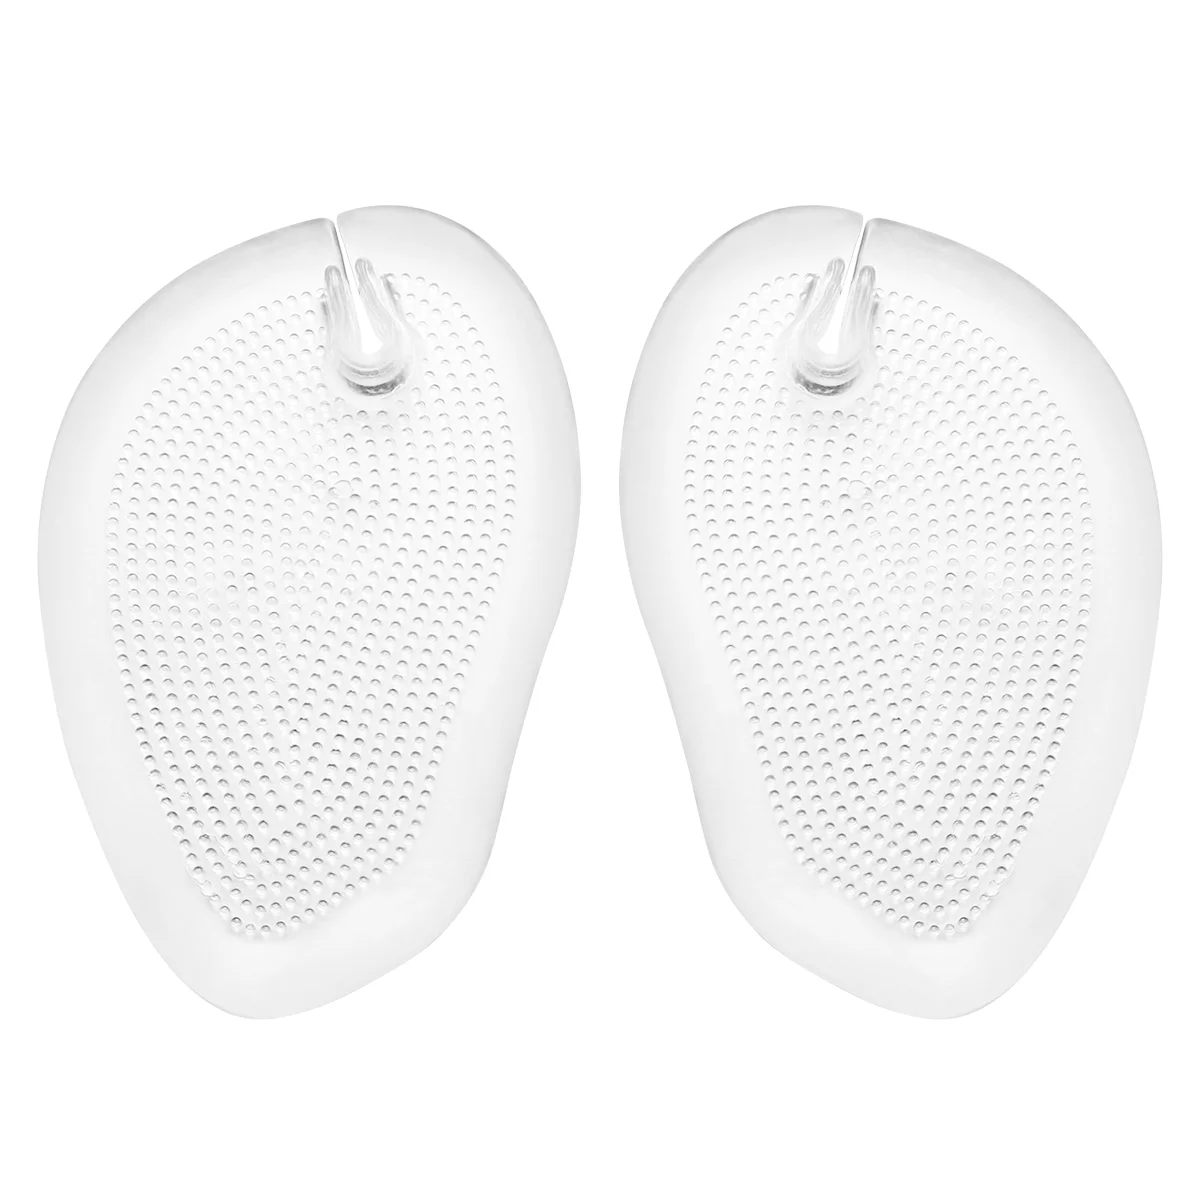 

Toe Protectors Sandals Sandal Pads Thong Insoles Shoes Inserts Silicone Protector Shoe Cushion Orthotic Cushioned Guards Tongue